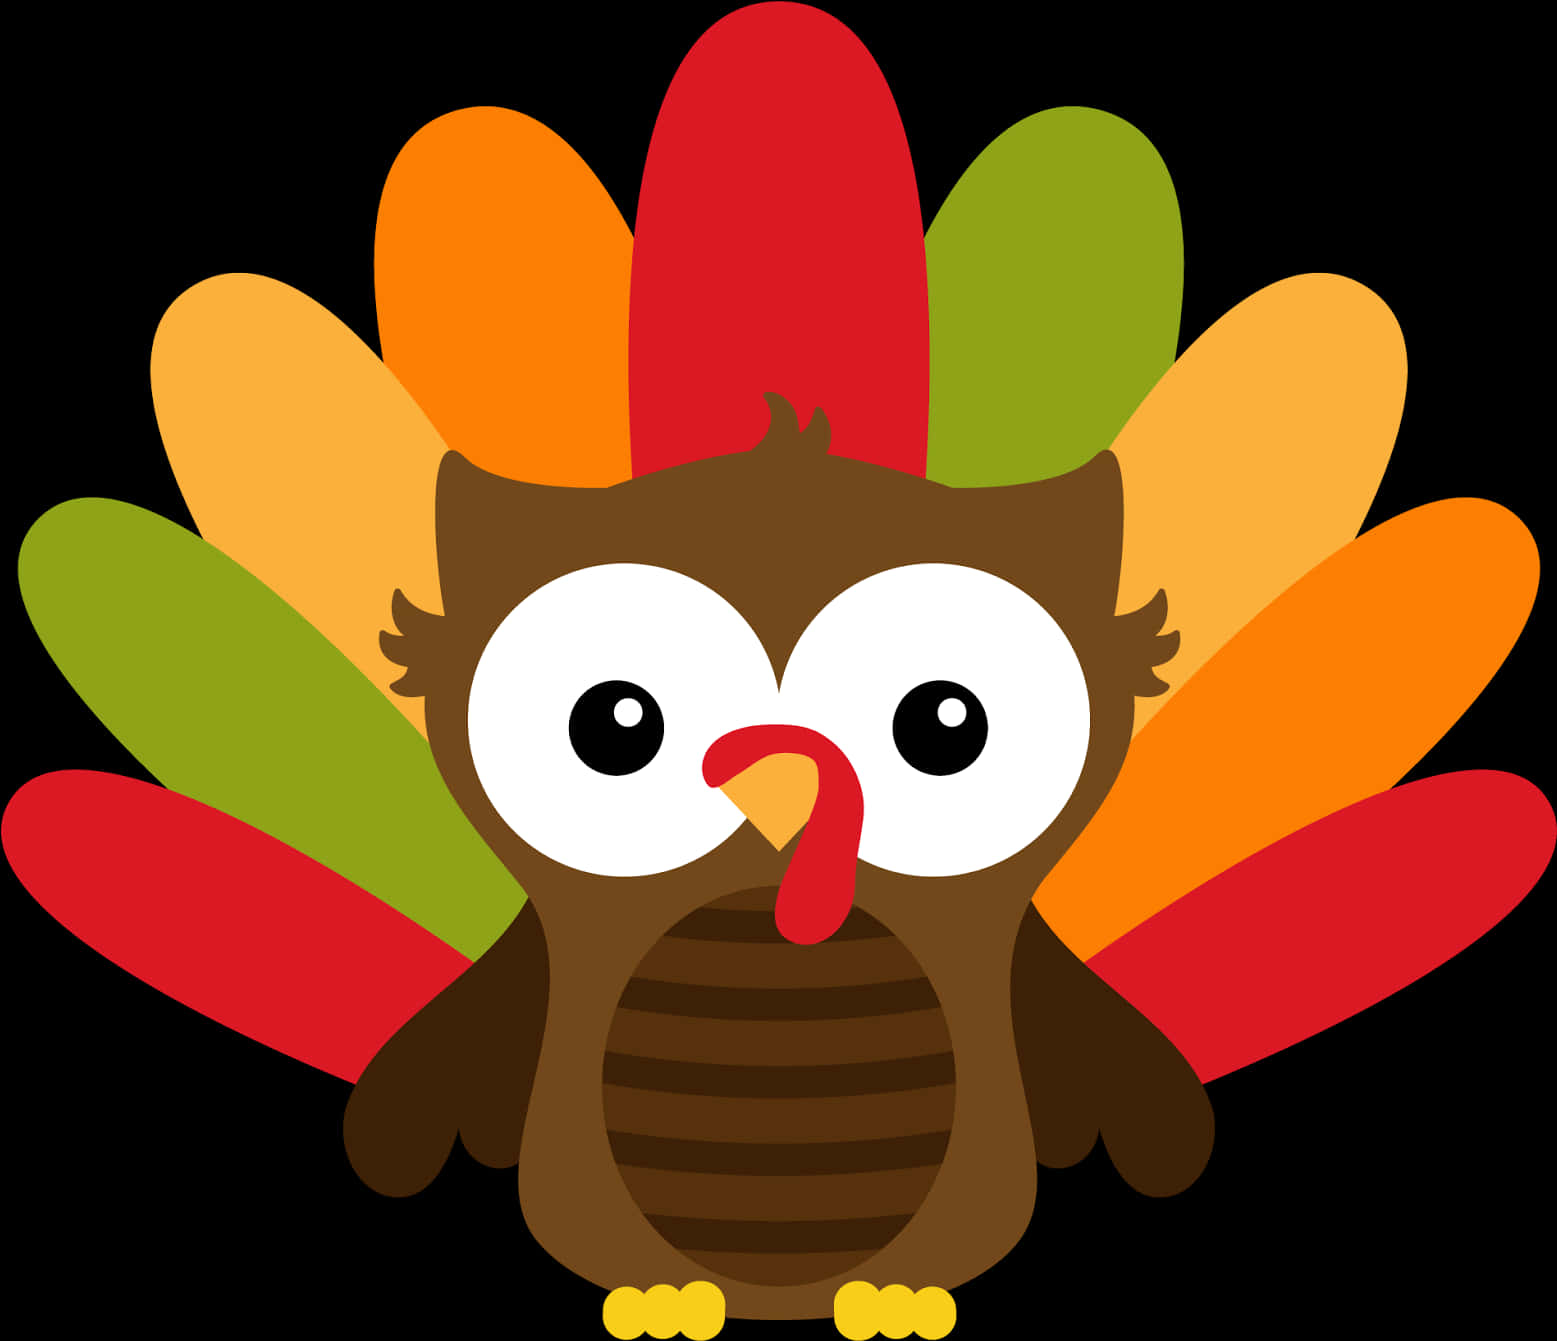 A Cartoon Turkey With Colorful Feathers